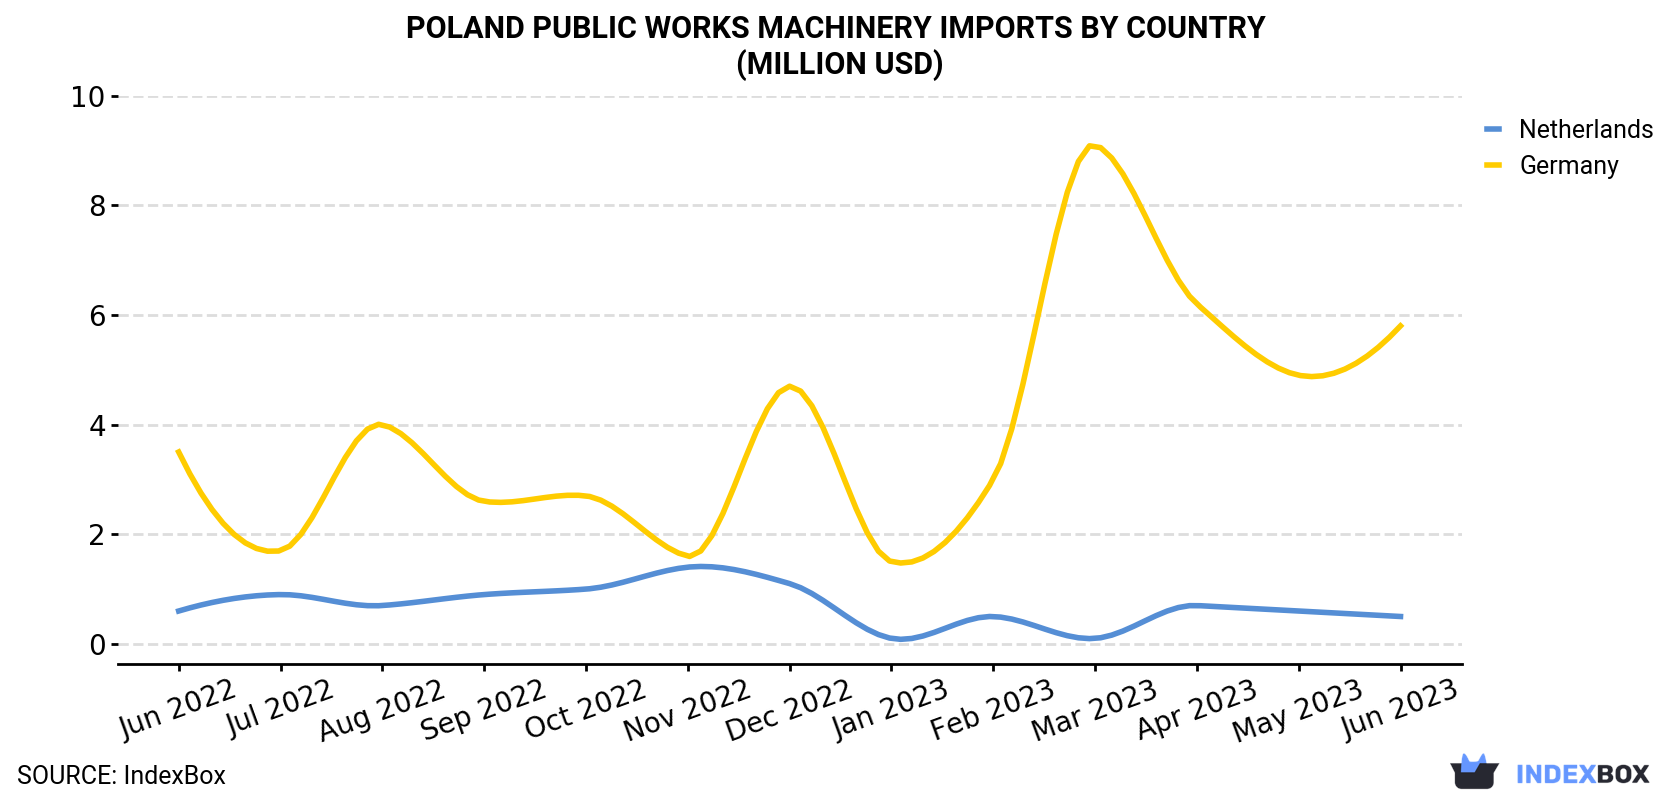 Poland Public Works Machinery Imports By Country (Million USD)